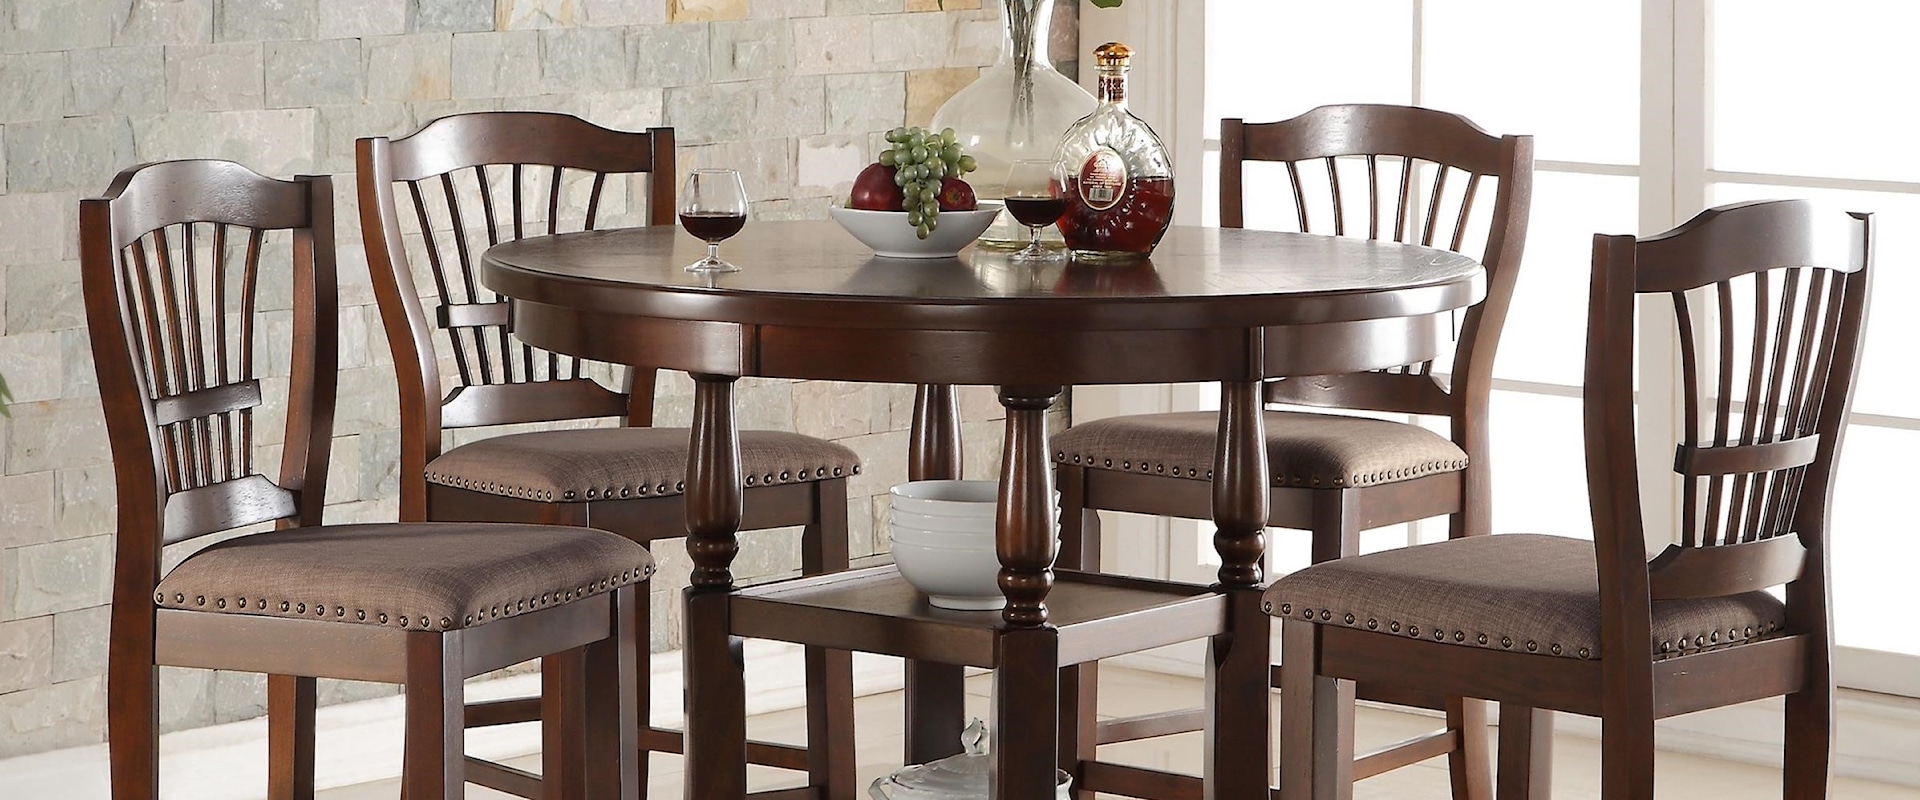 5 Piece Round Counter Table Set with Storage Shelves